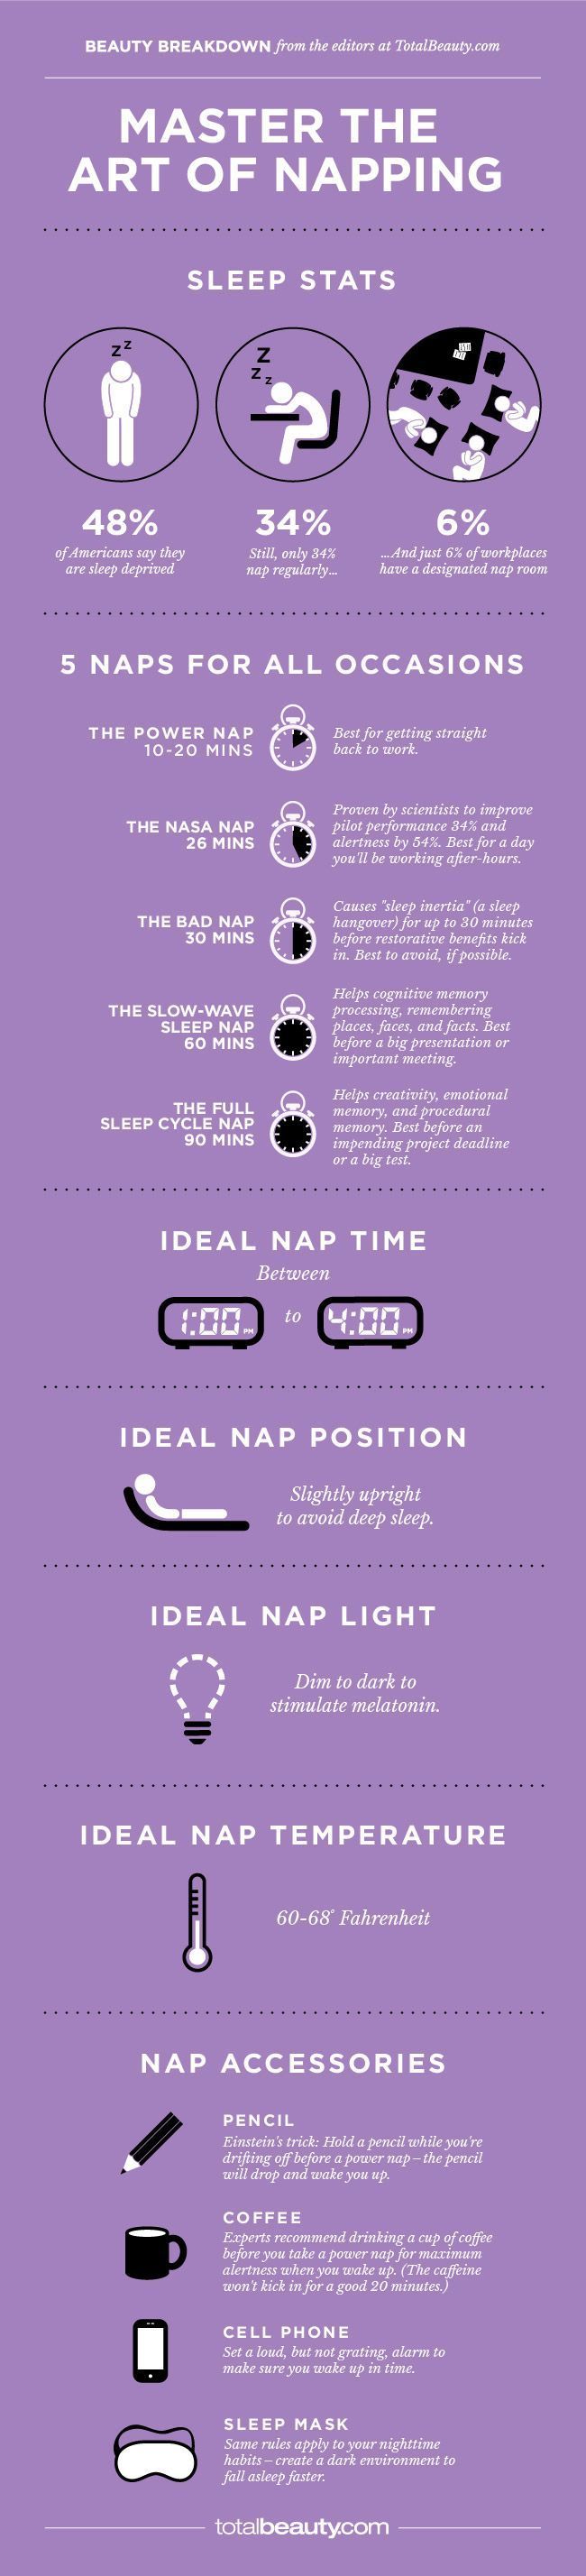 Useful Napping Tips That Most People Don't Know (Infographic)  - LifeHack